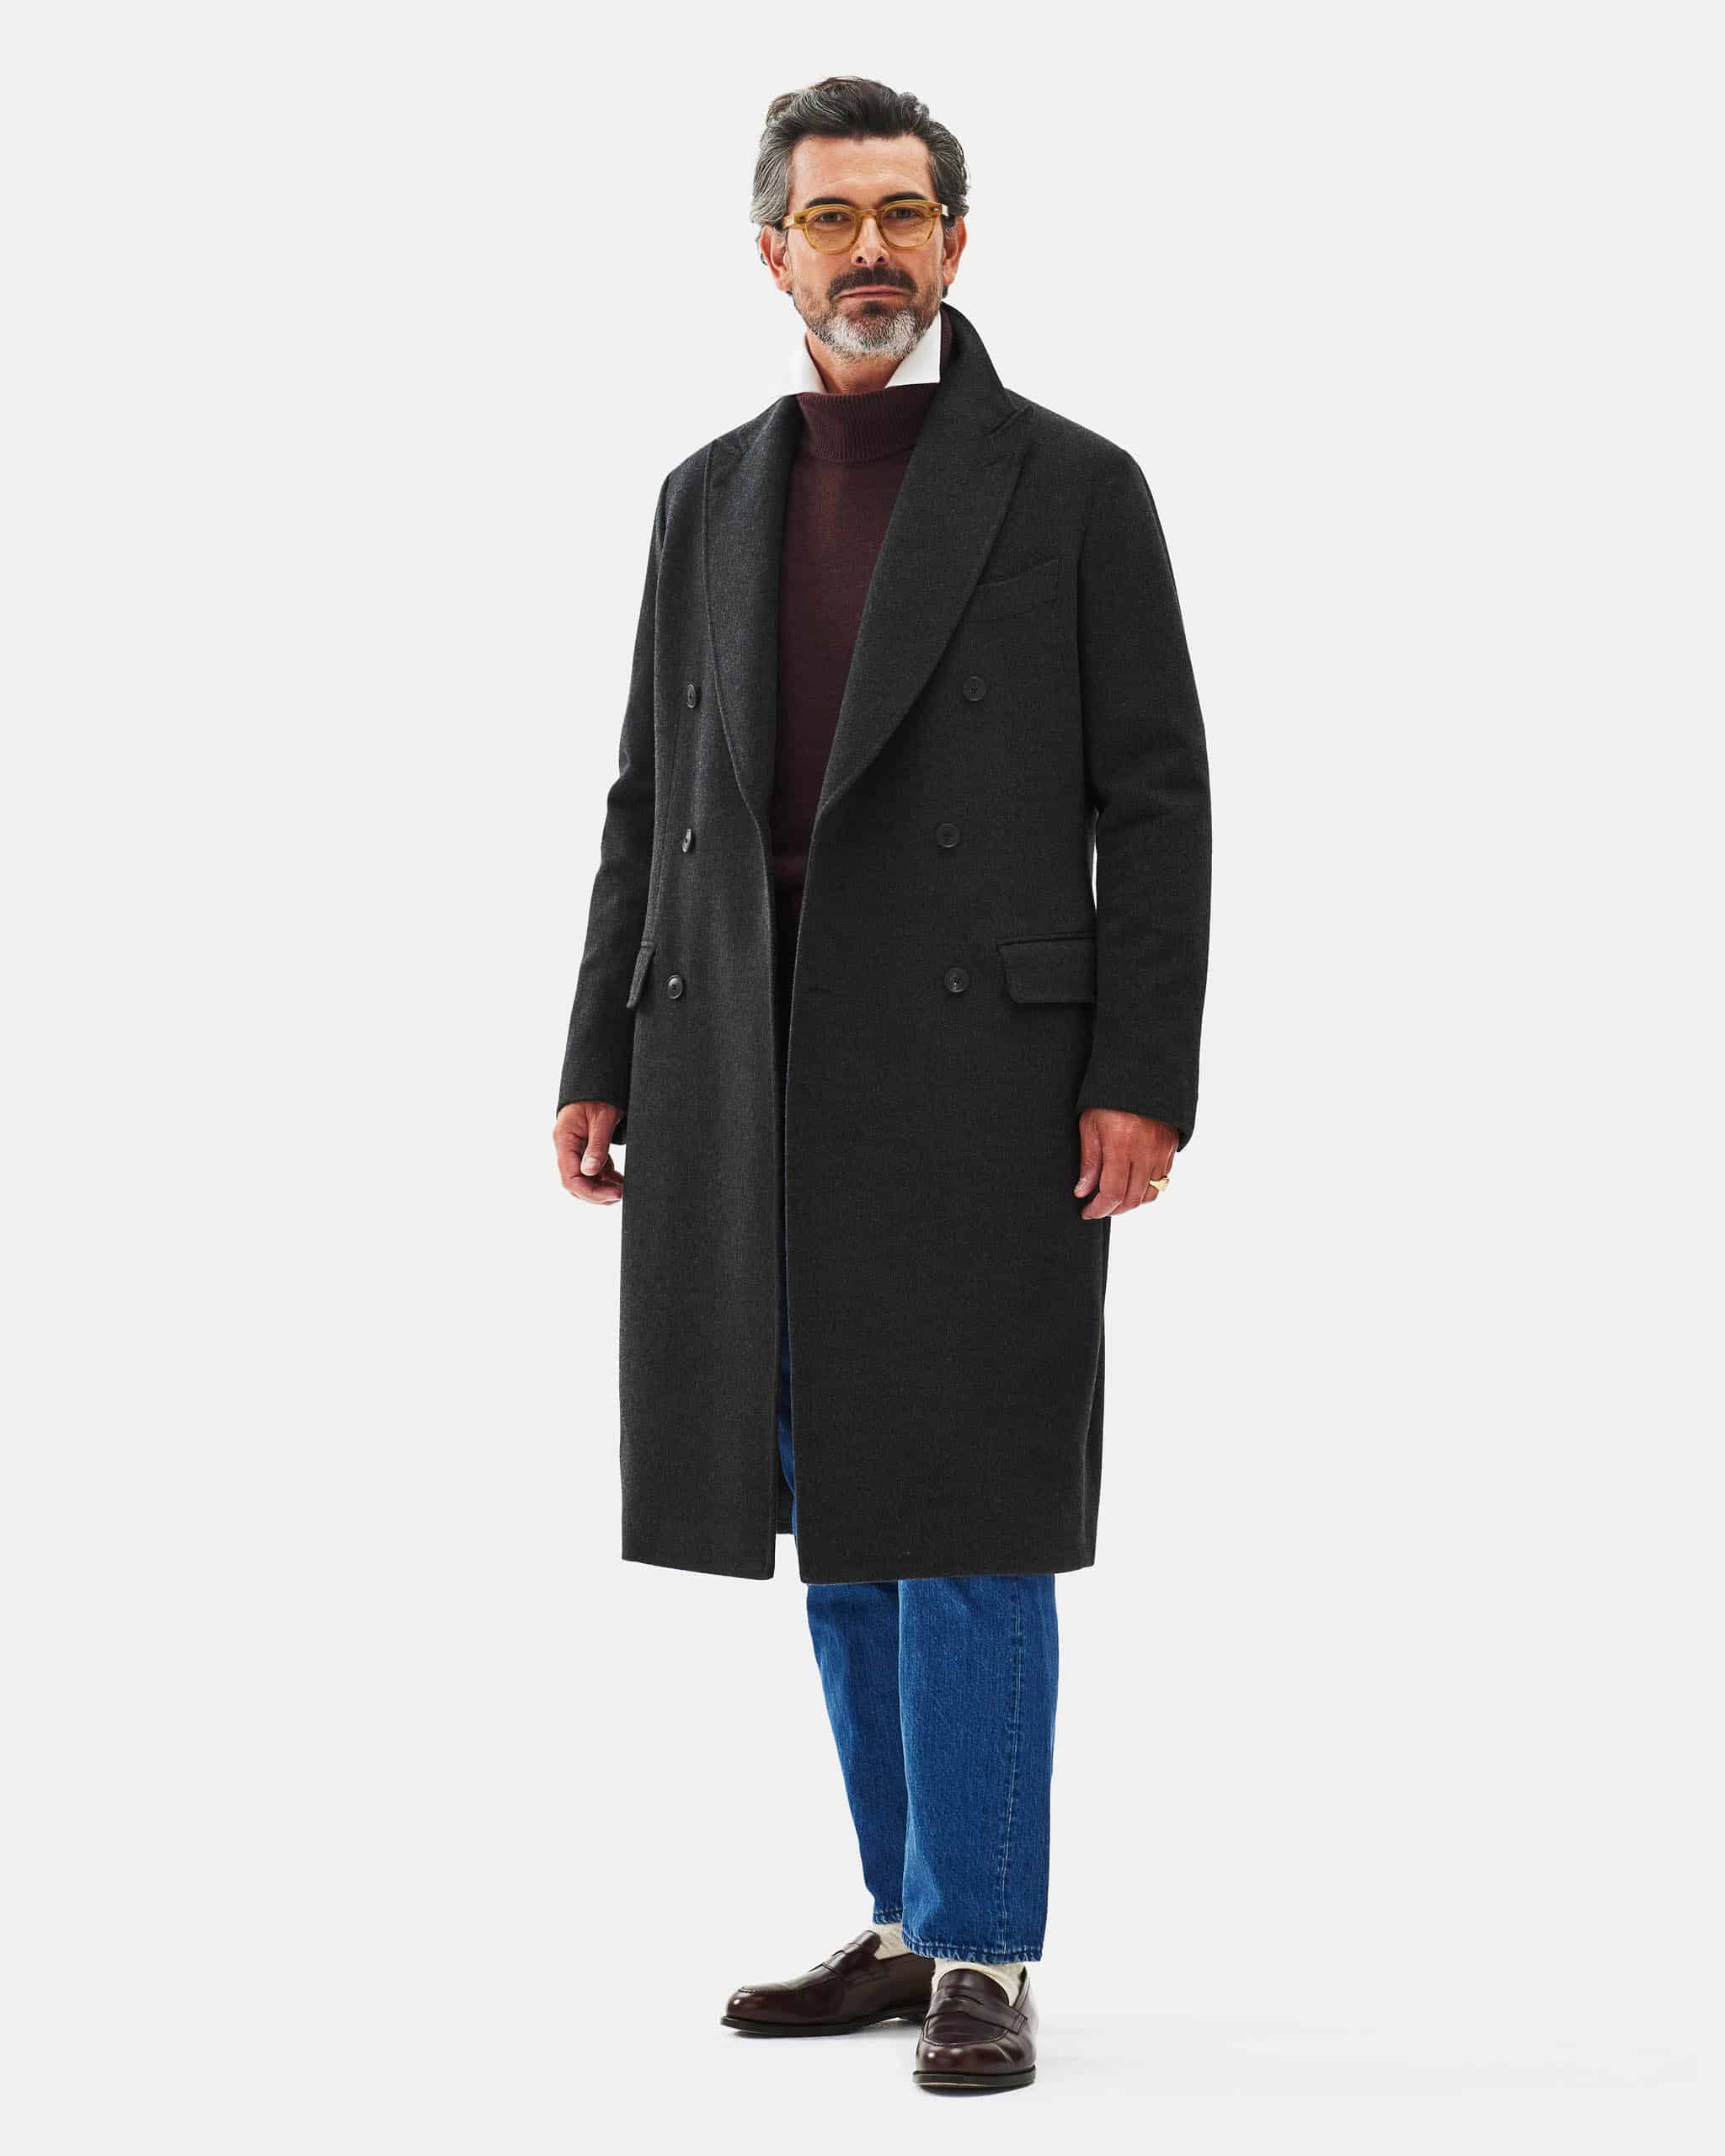 Overcoat wool & cashmere charcoal image 1